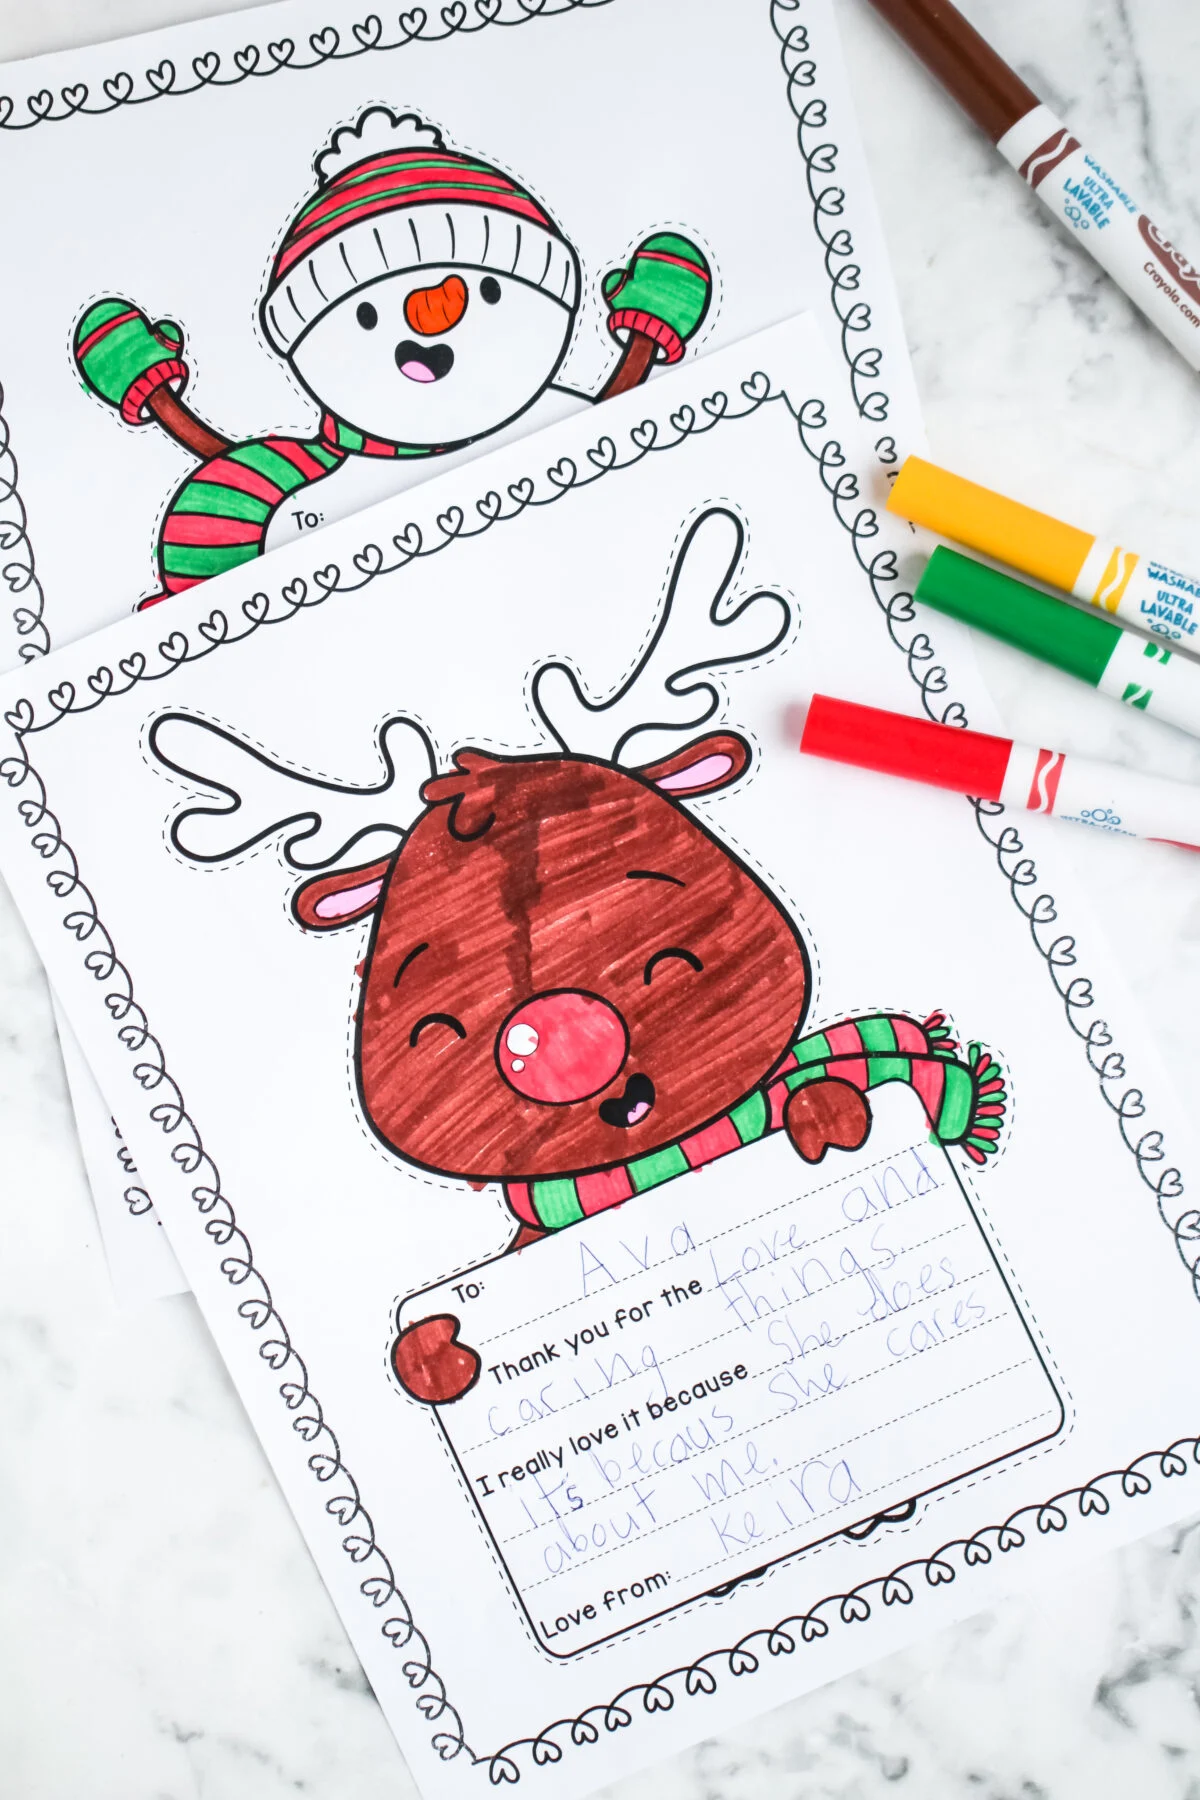 Print these free printable Christmas thank you notes that your kids can colour in to send heartfelt Thank Yous to friends and family.